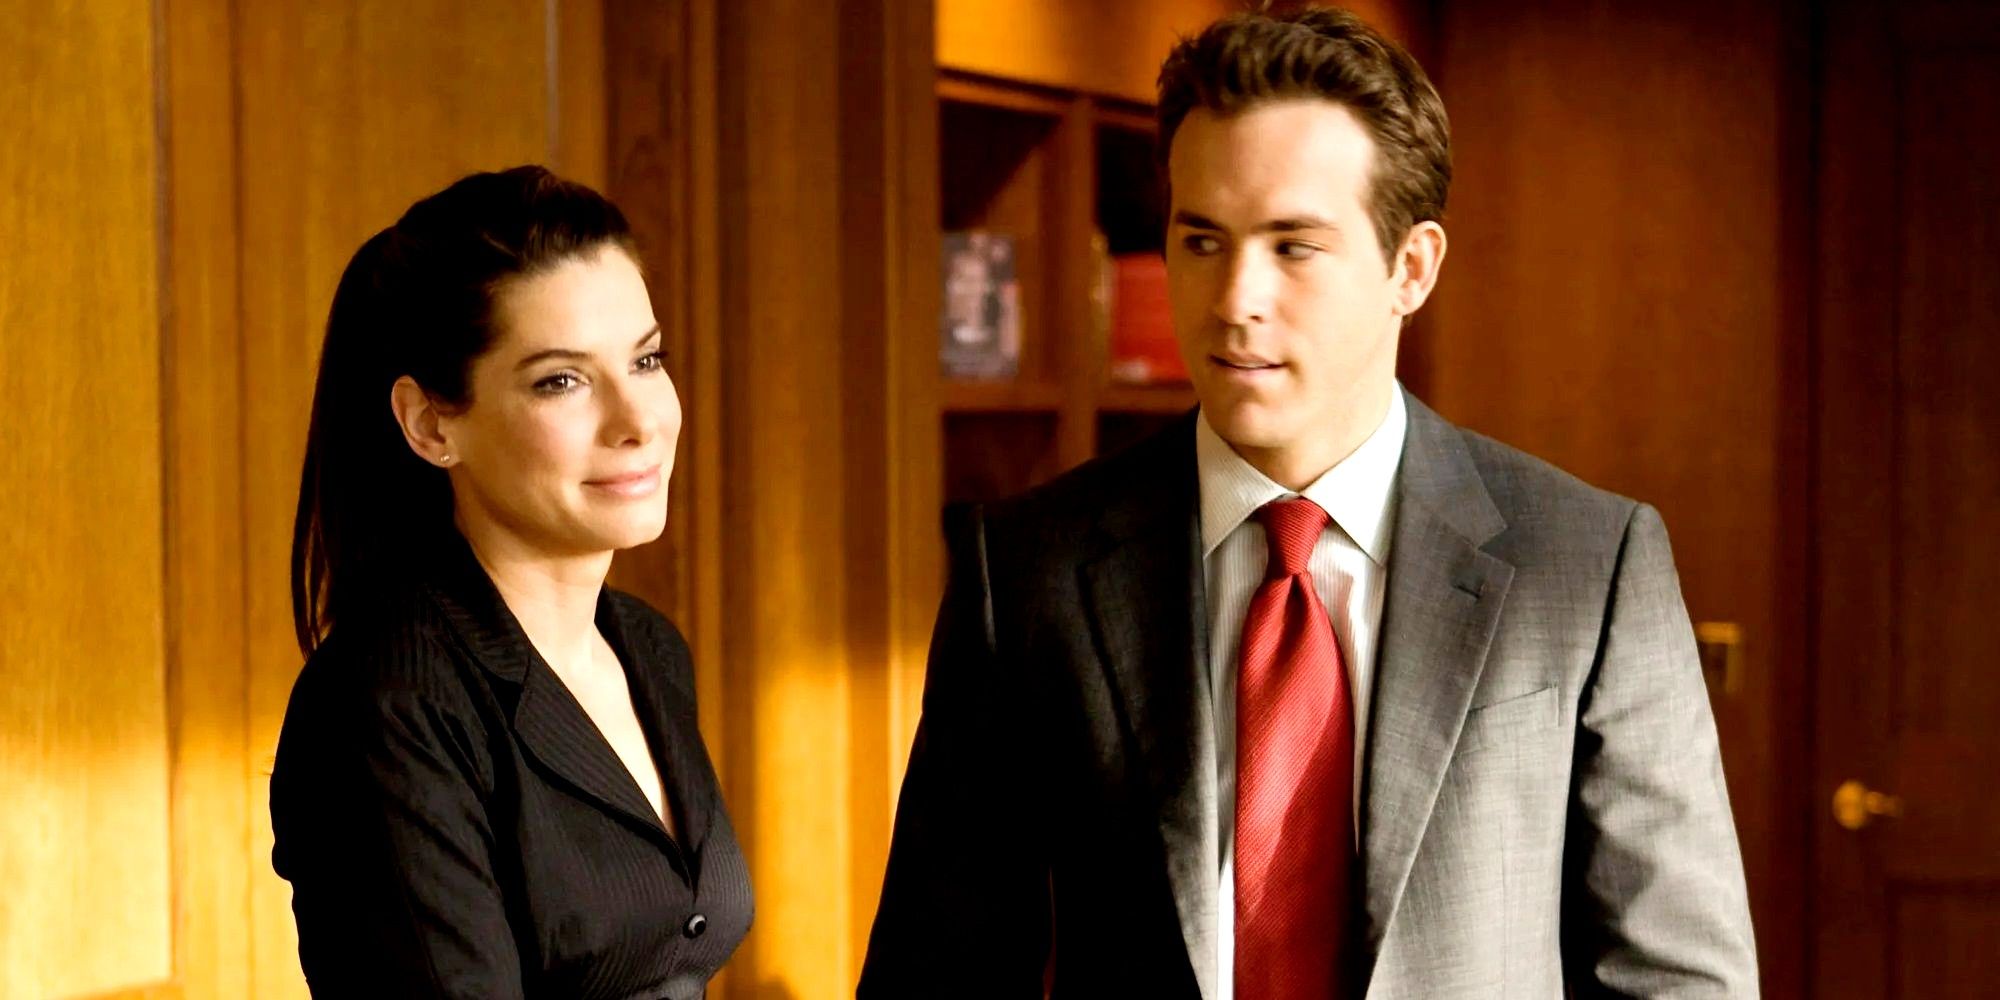 Margaret (Sandra Bullock) and Andrew (Ryan Reynolds) stand together in her office in The Proposal.